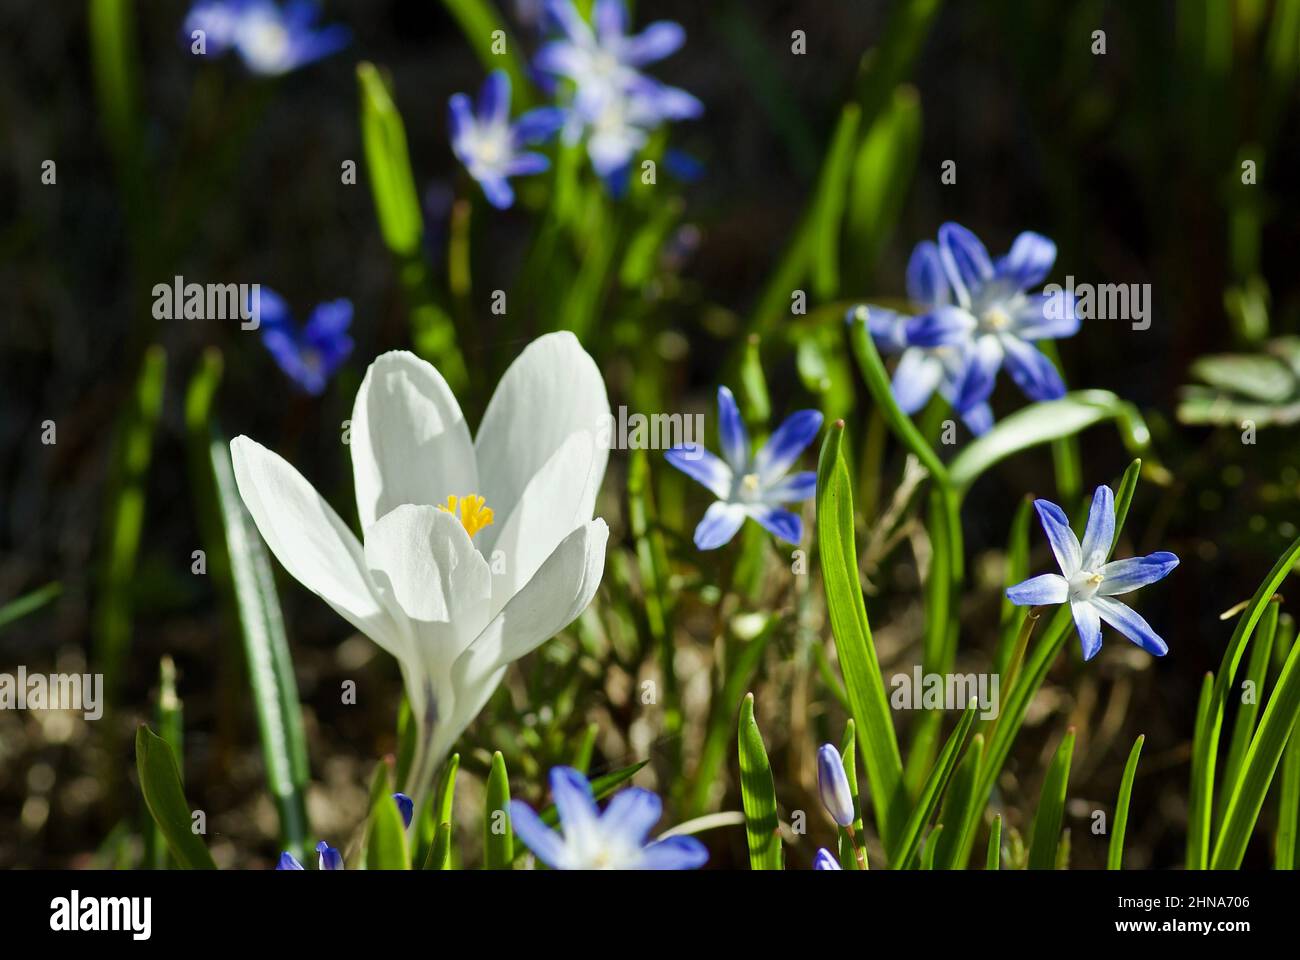 One white crocus flower among blue Glory-of-the-snow flowers in spring. Stock Photo